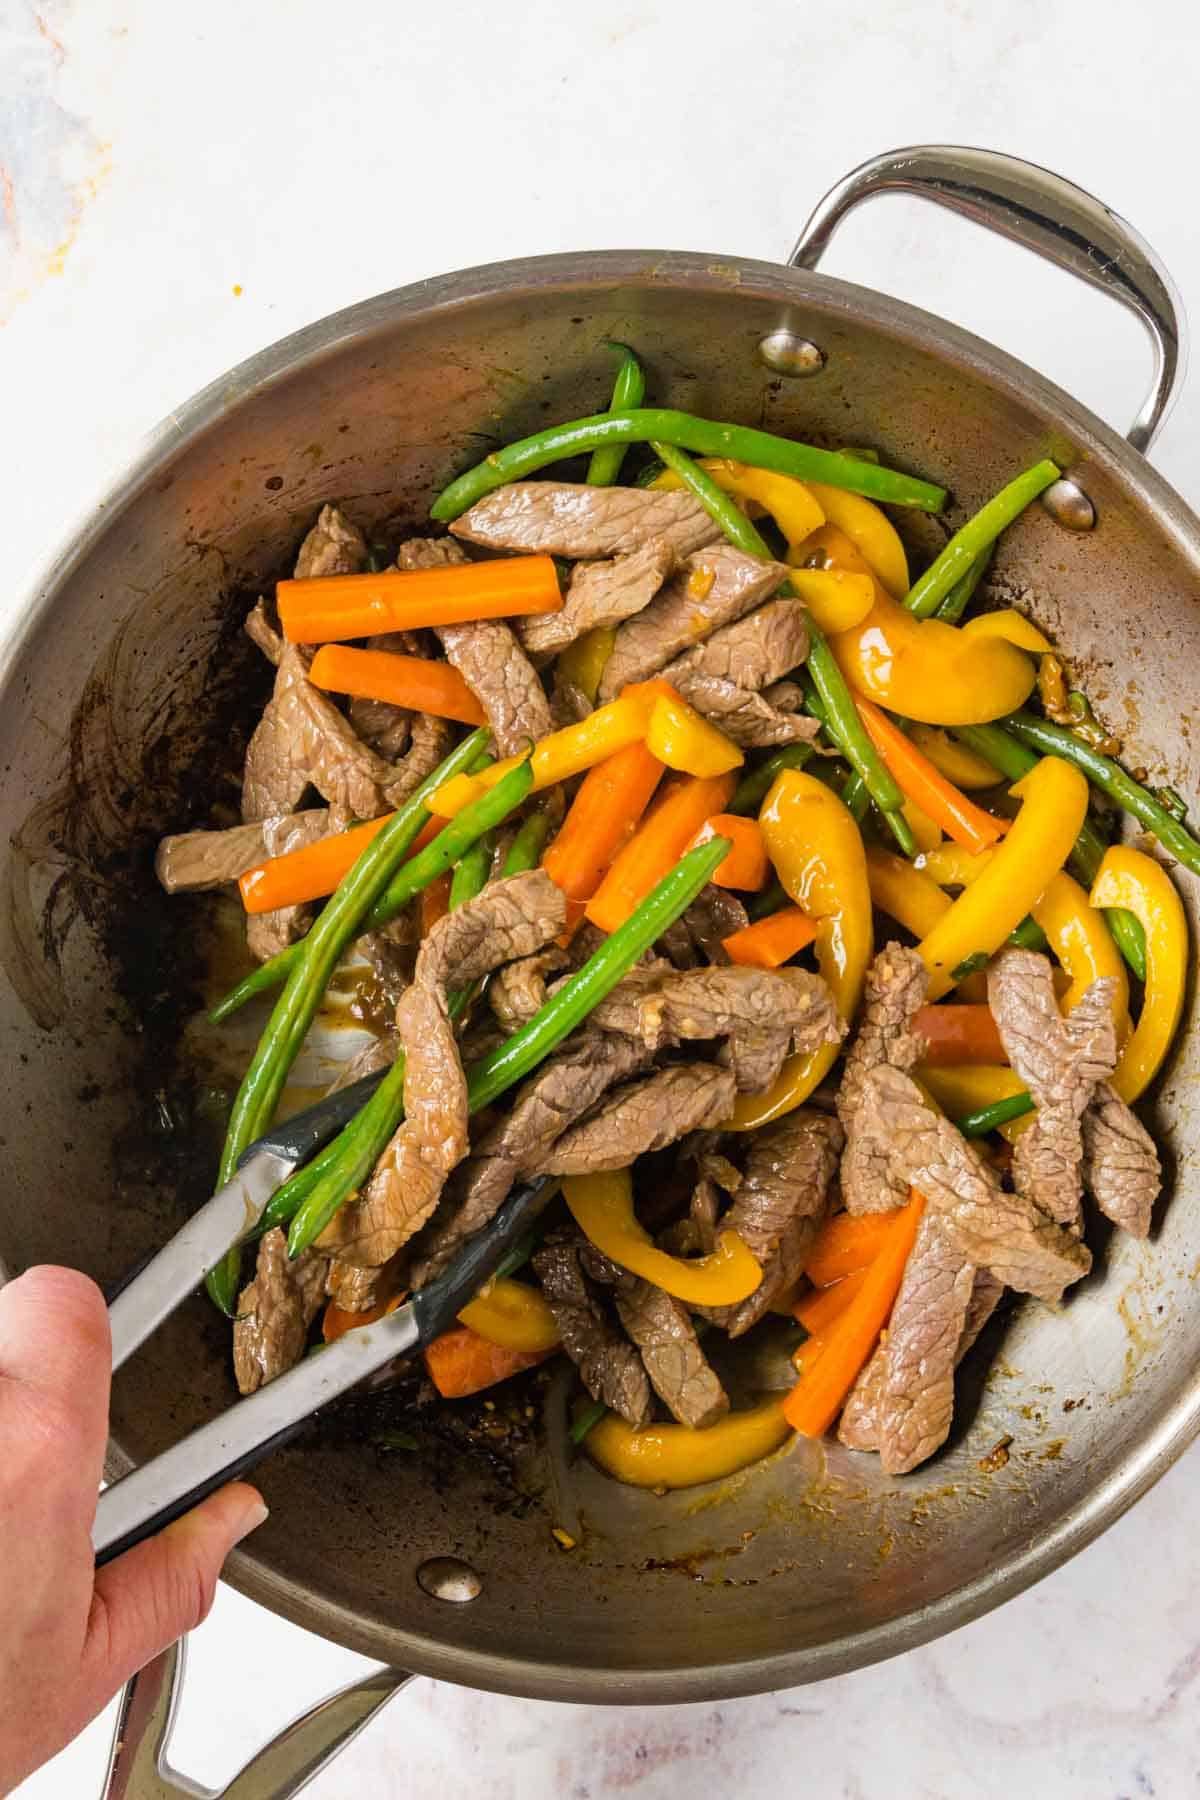 Tossing the beef and vegetable stir fry together in the a wok with tongs.